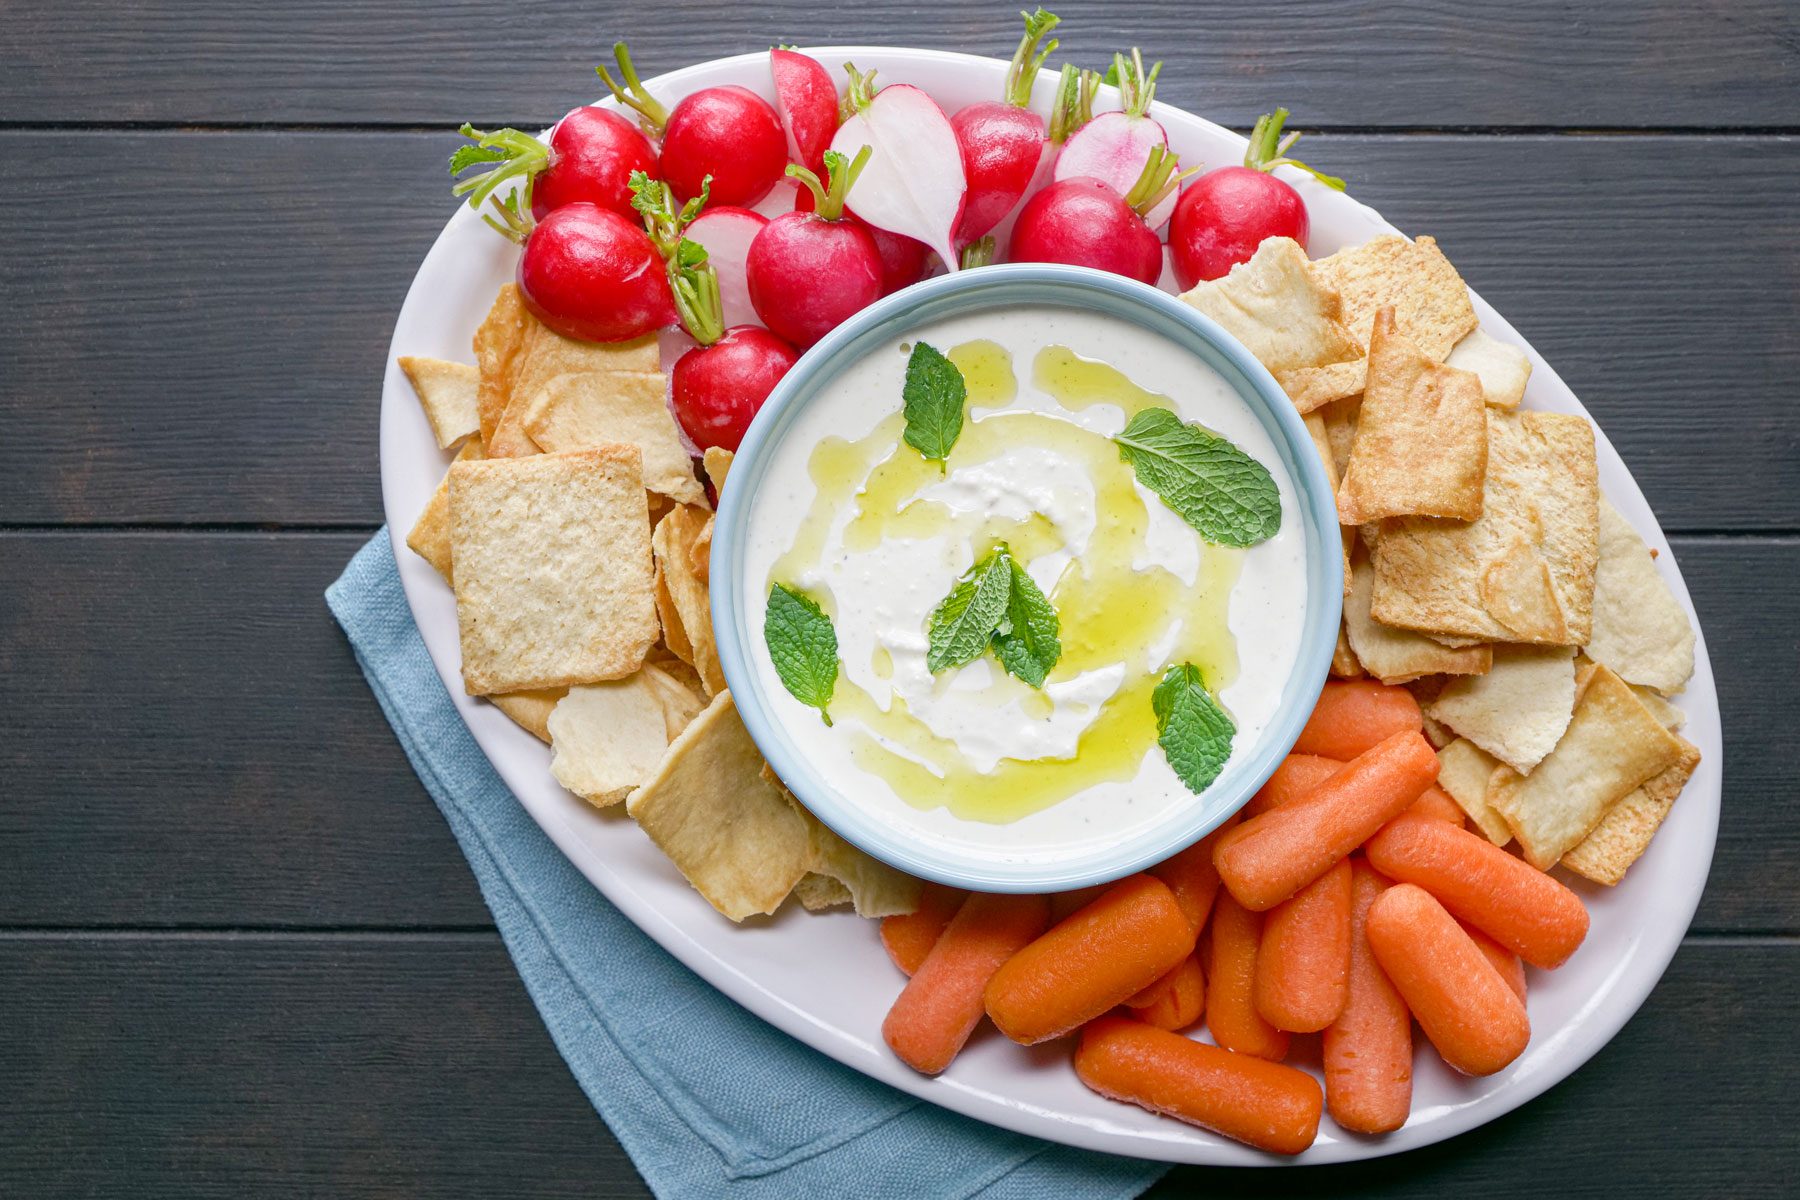 Whipped Feta Dip with other vegetables and snacks in served in a small plate